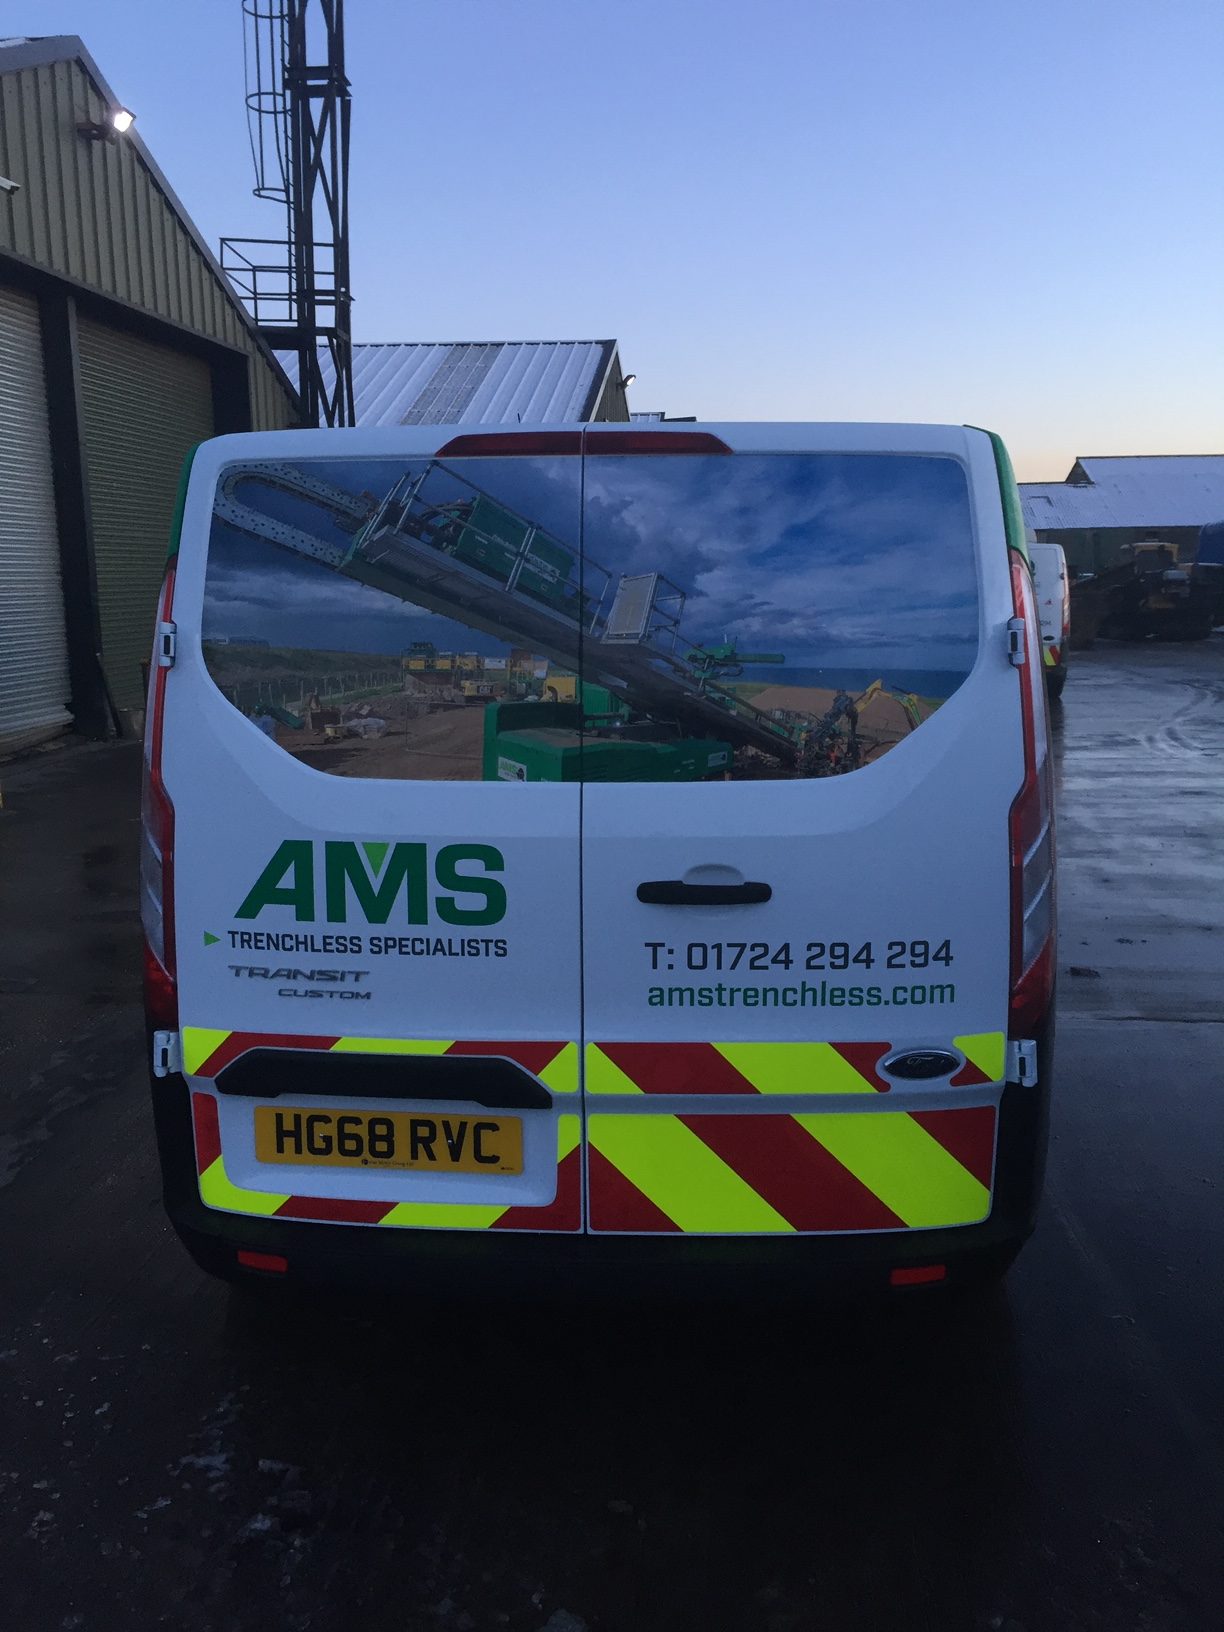 New fleet of vans added by AMS Trenchless